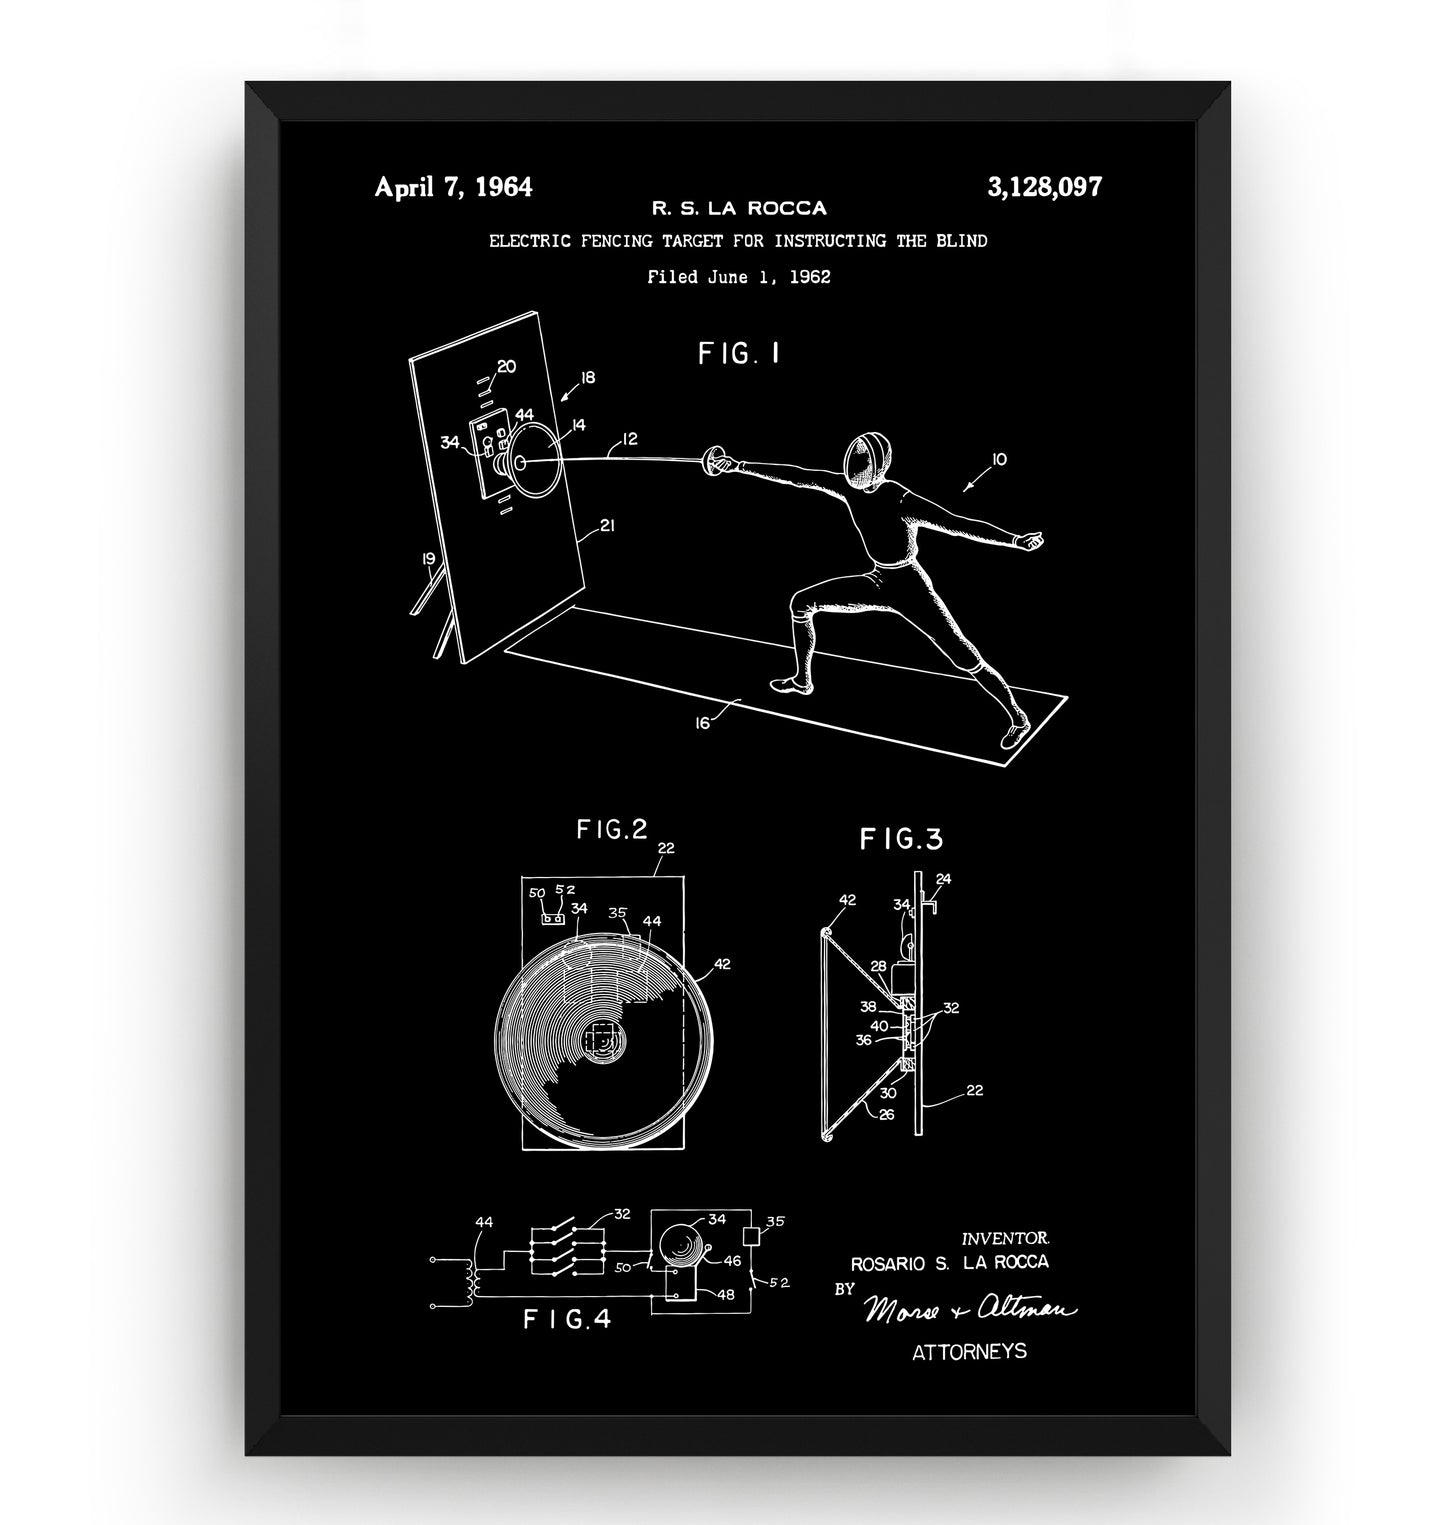 Electronic Fencing Target 1964 Patent Print - Magic Posters